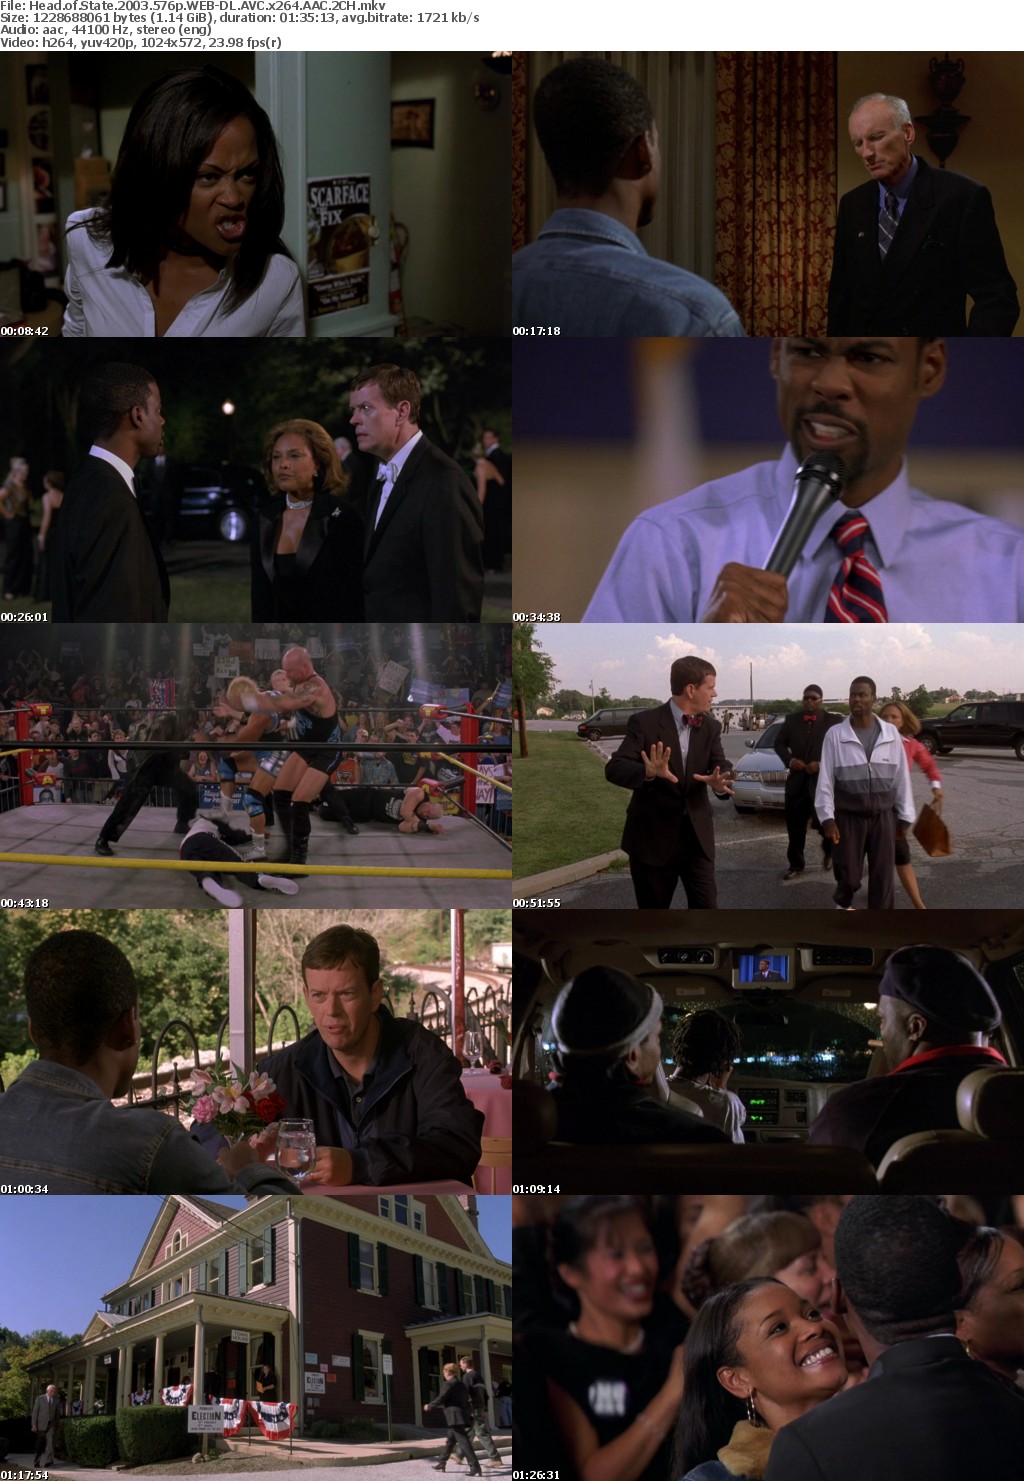 Head of State (2003) (576p WEB-DL AVC x264 AAC 2CH)